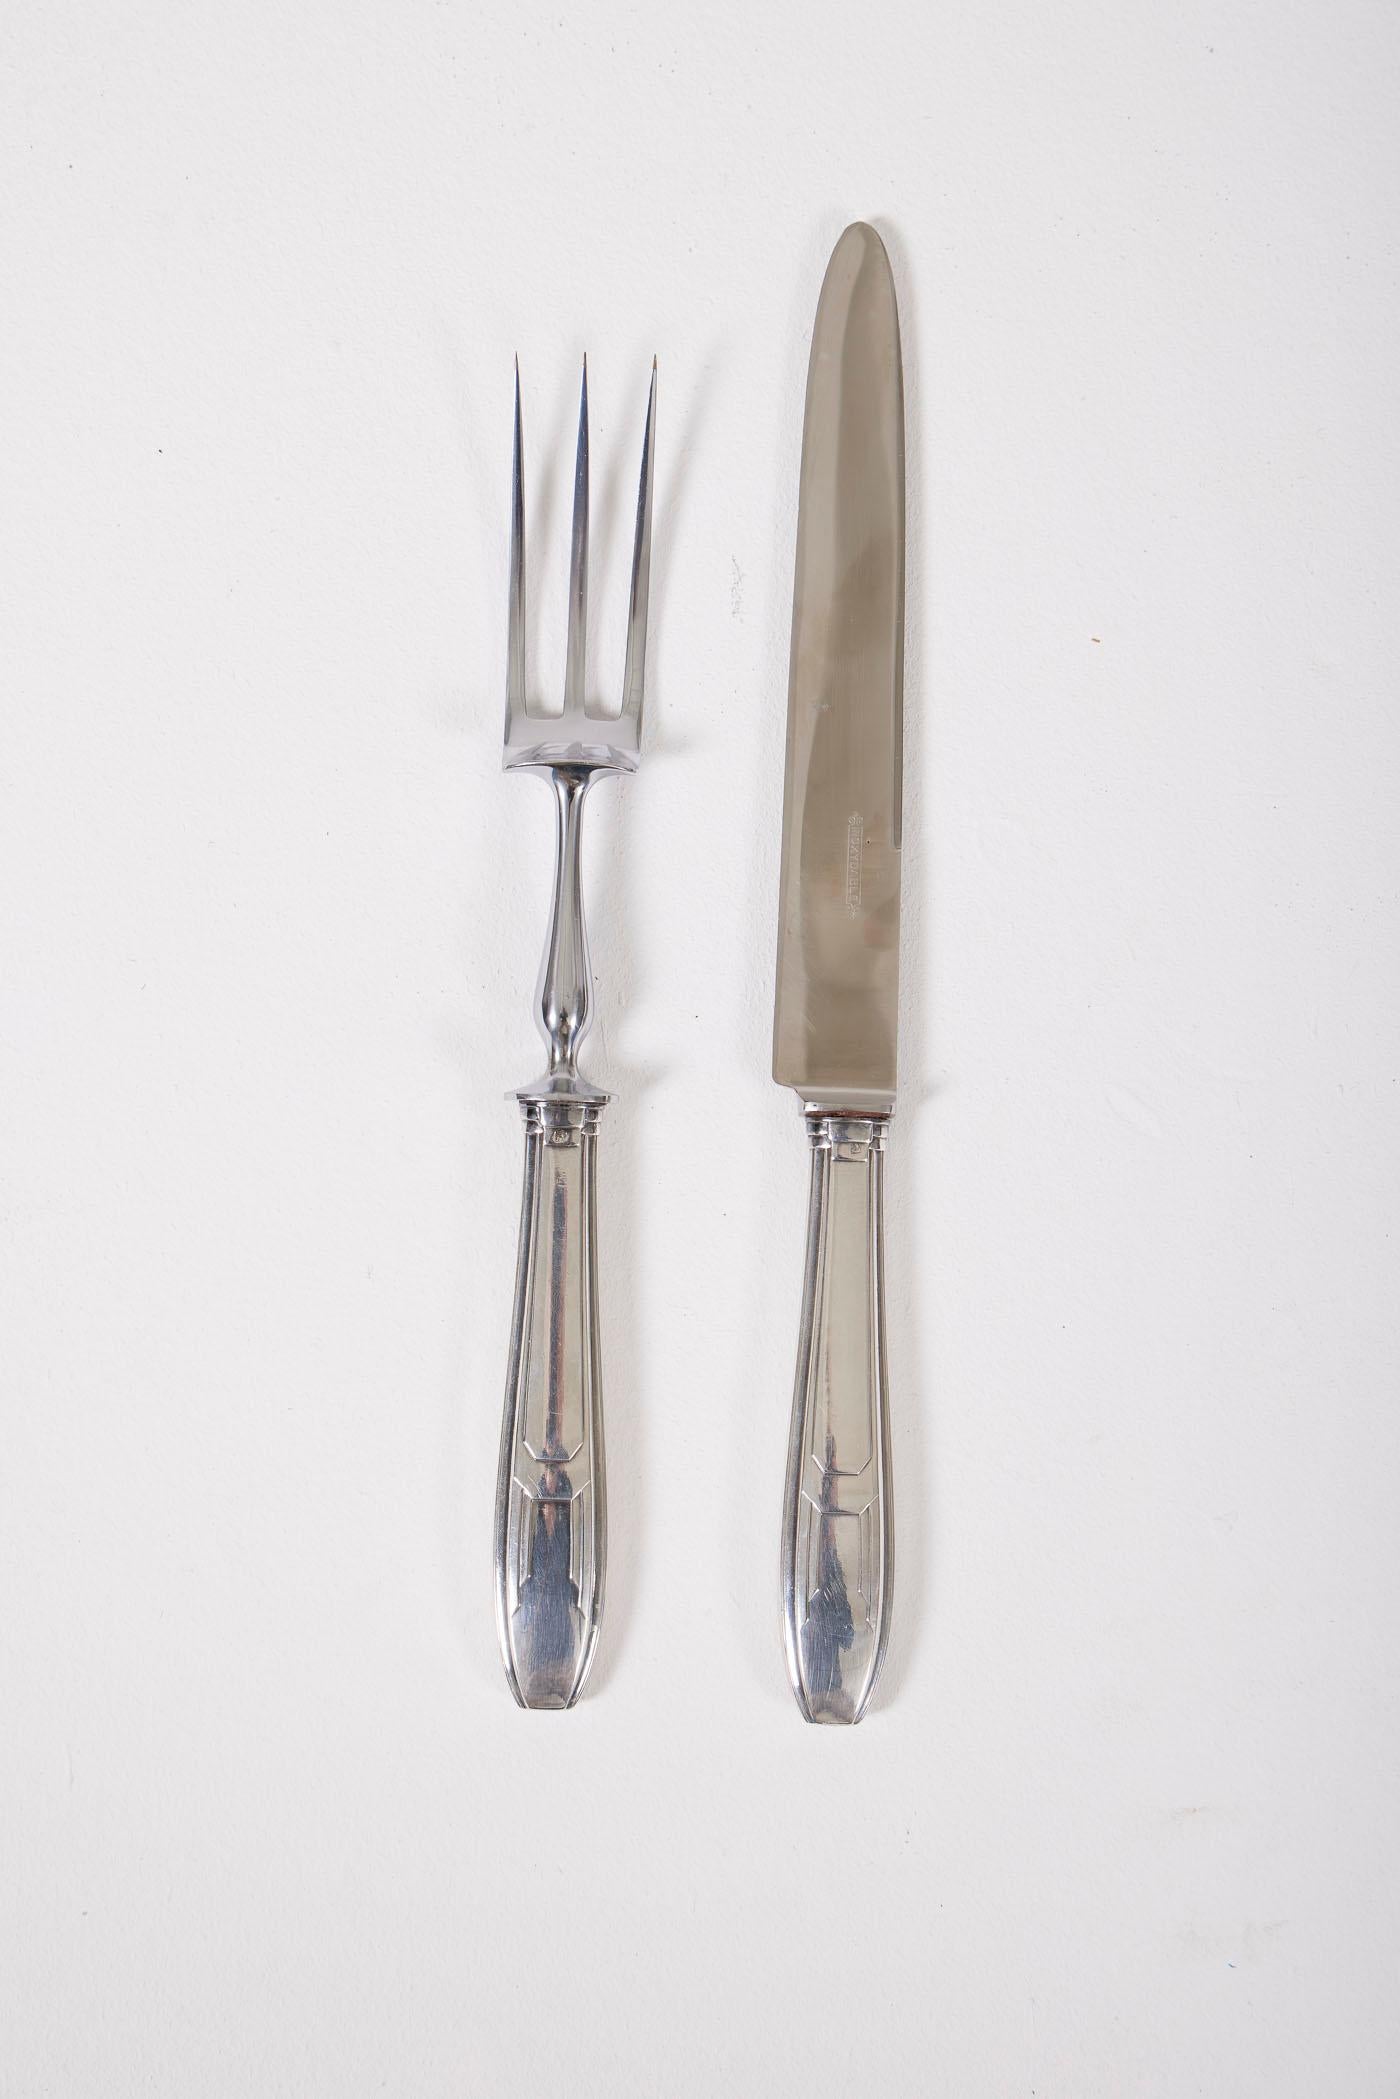 Art Deco-style stainless steel carving utensils, including a fork and a knife. Perfect condition.
LP2177